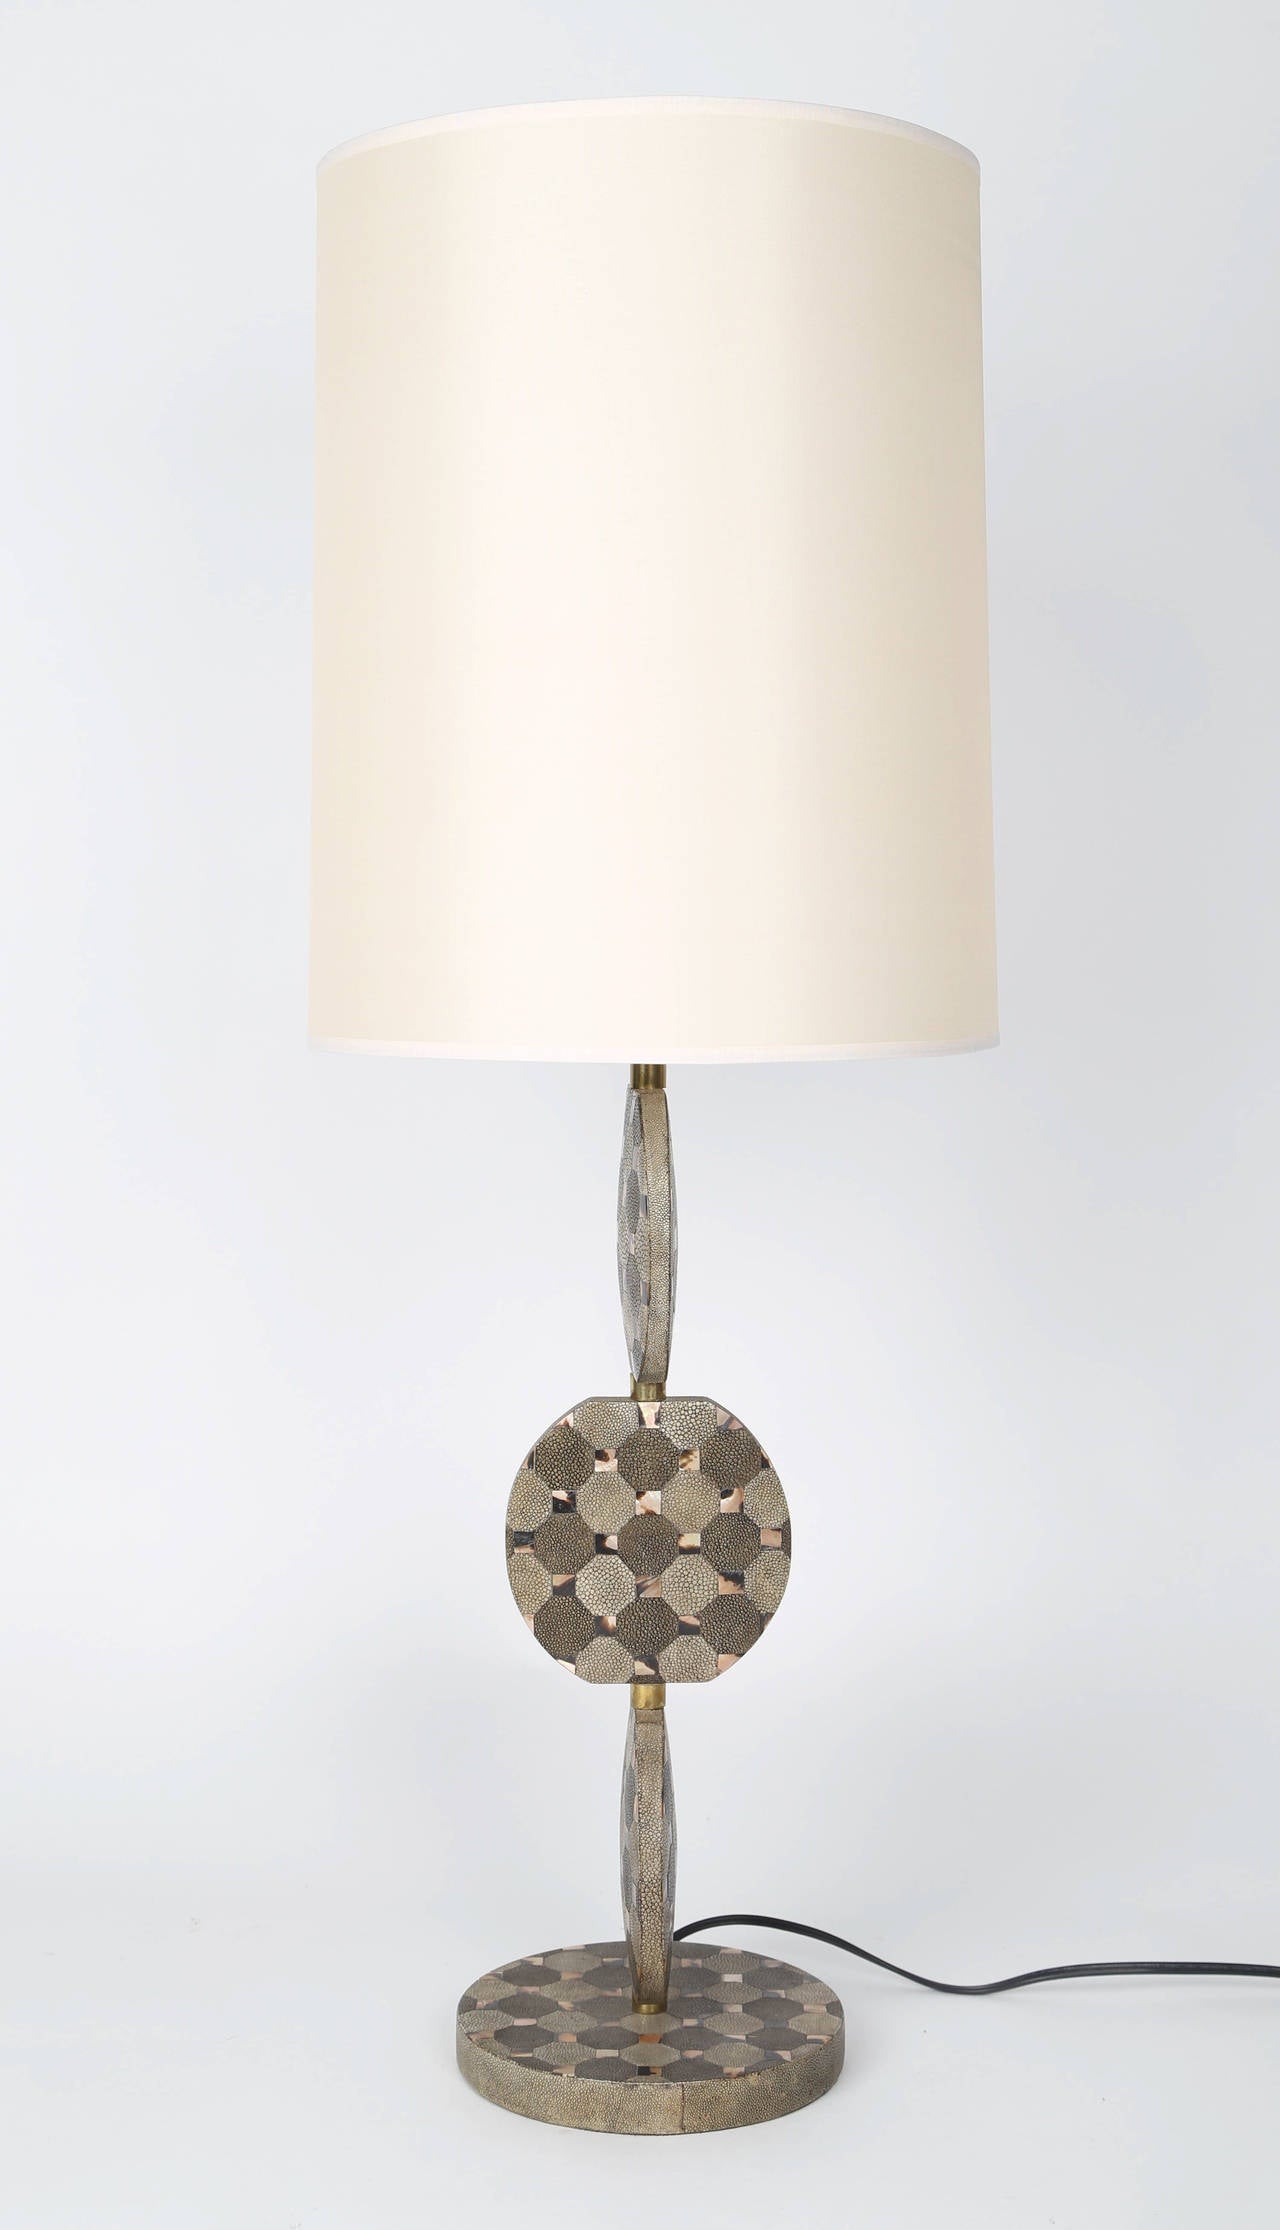 French Sculptural Table Lamp in Shagreen and Horn by R & Y Augousti, circa 1980s For Sale